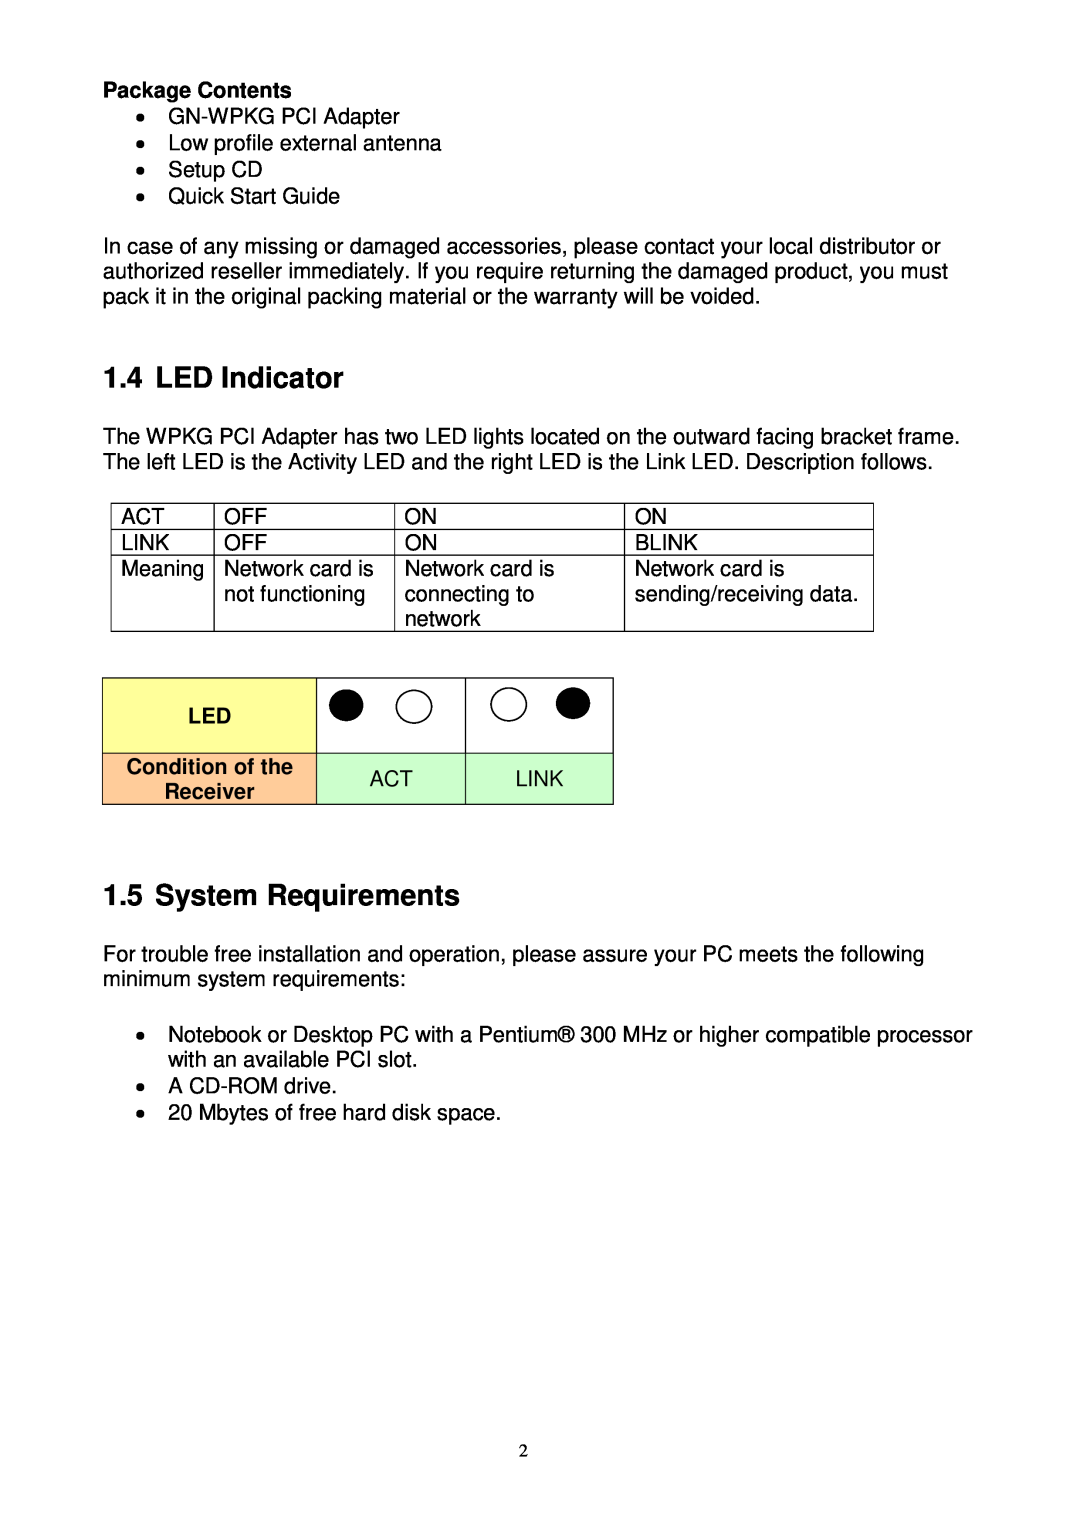 Gigabyte GN-WPKG user manual LED Indicator, System Requirements, Package Contents, Condition of the, Receiver 